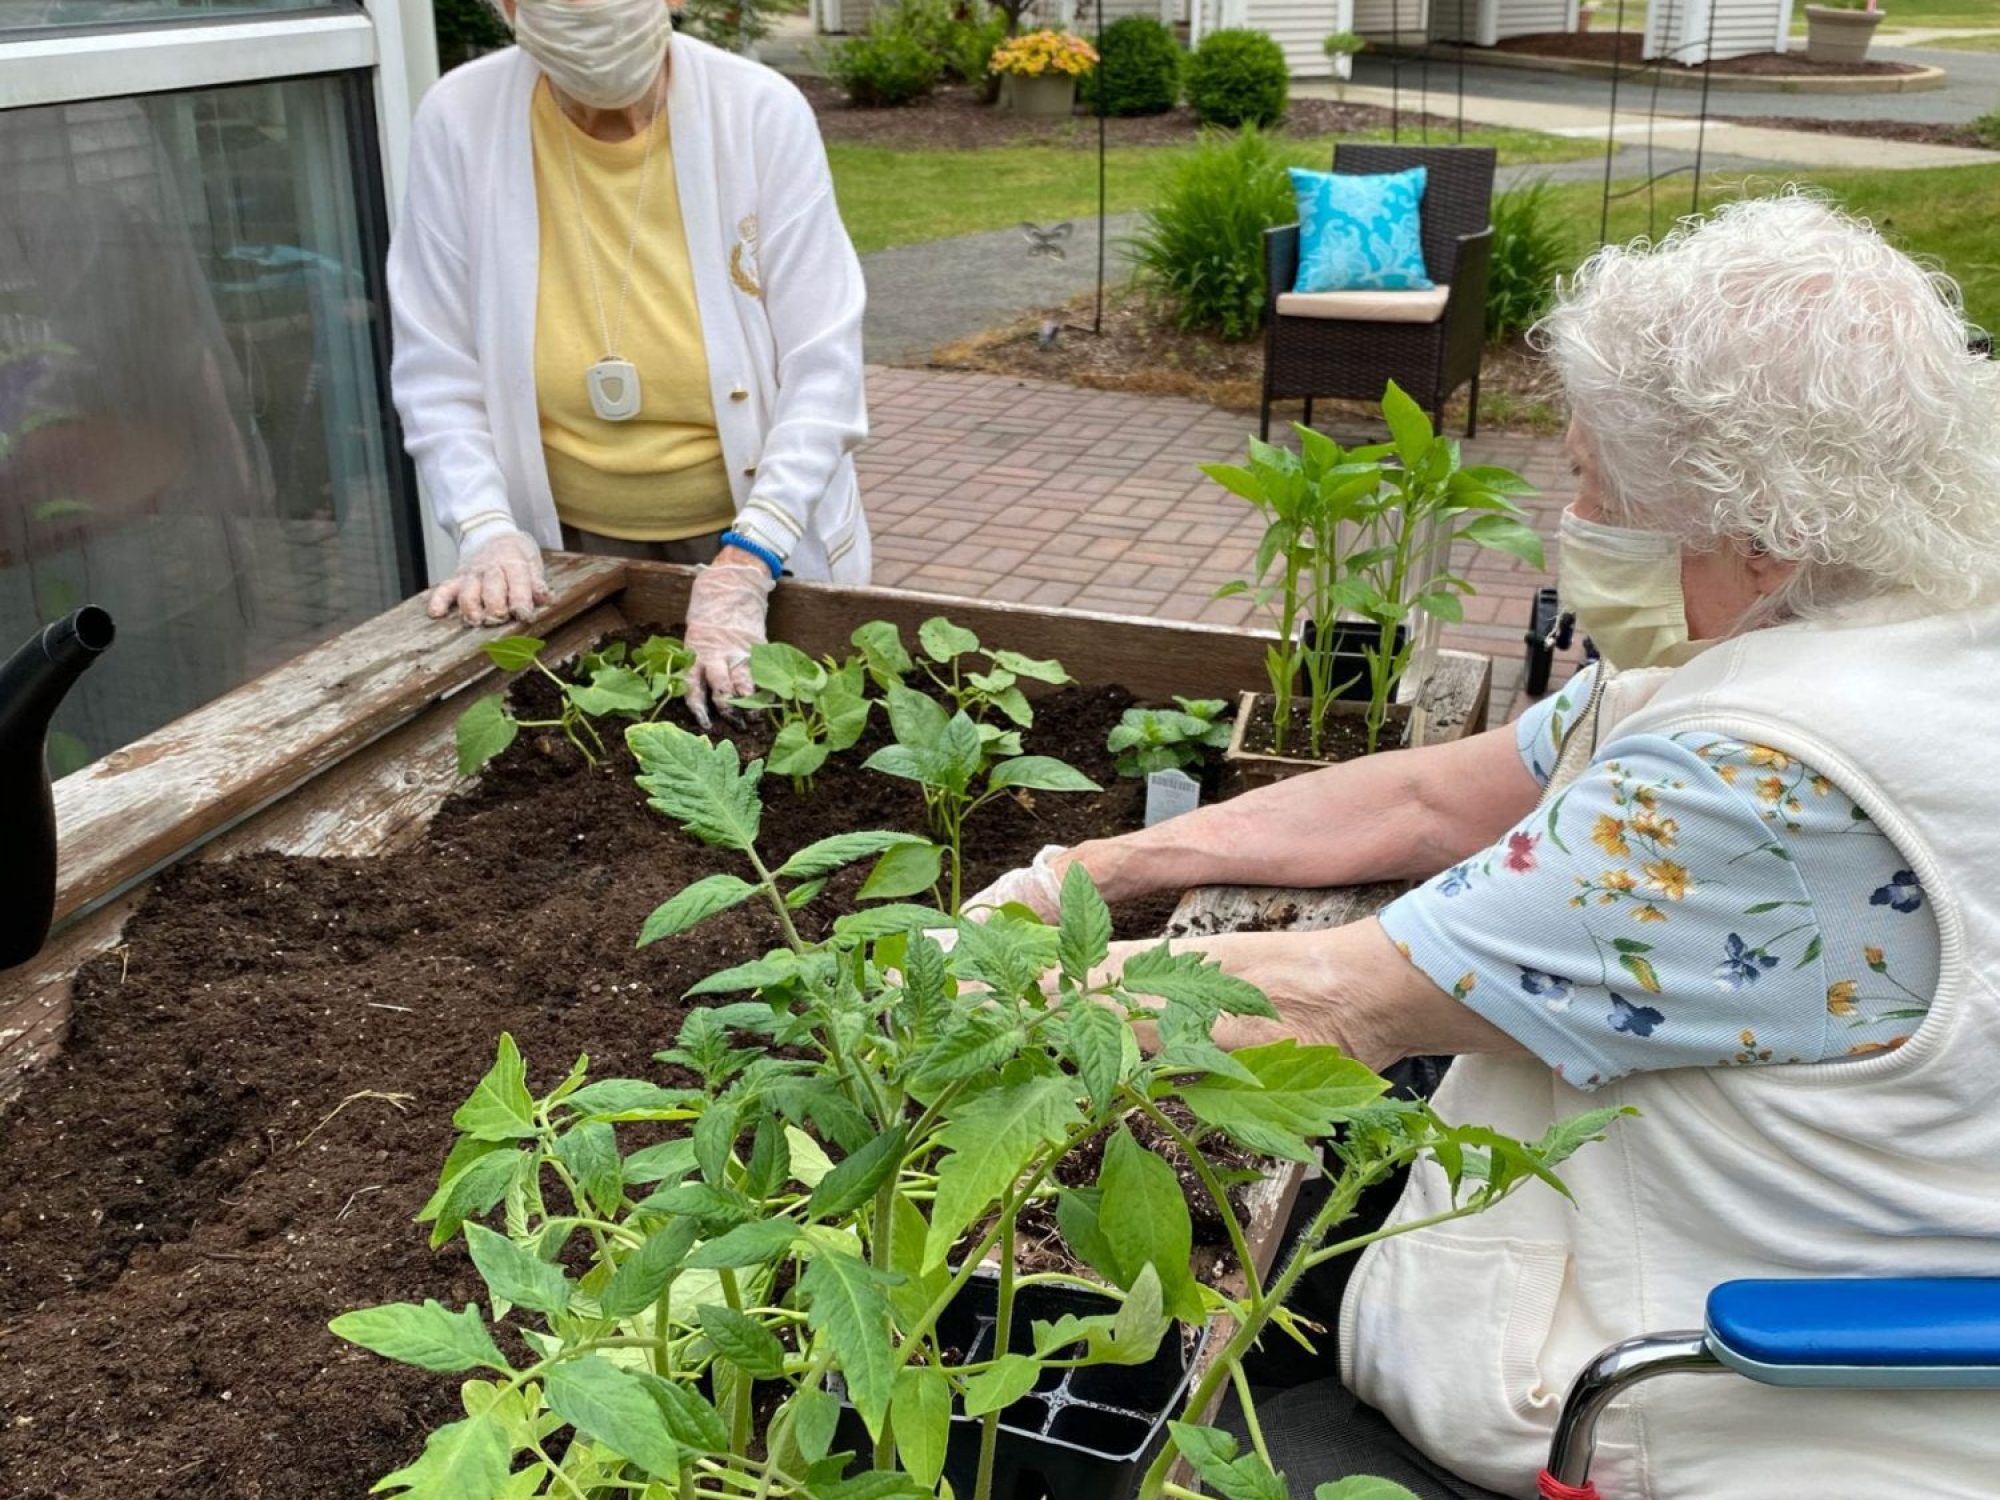 Ruth's House residents gardening in their masks